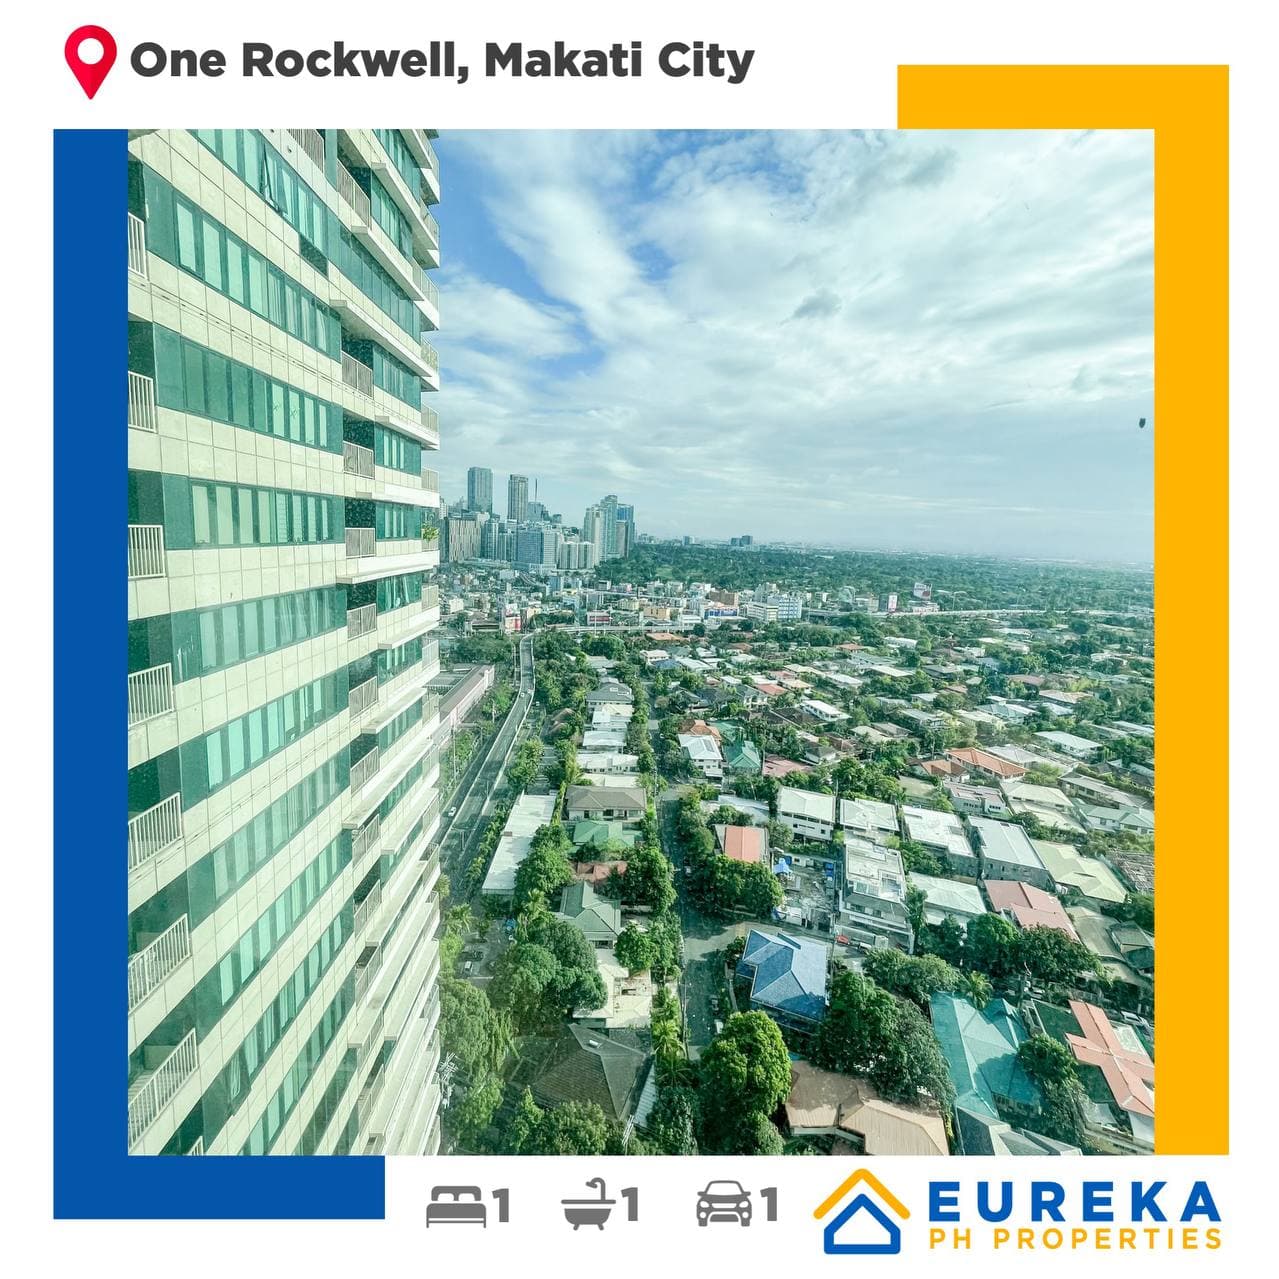 1BR 68 sqm unit at One Rockwell East Tower, Makati City.